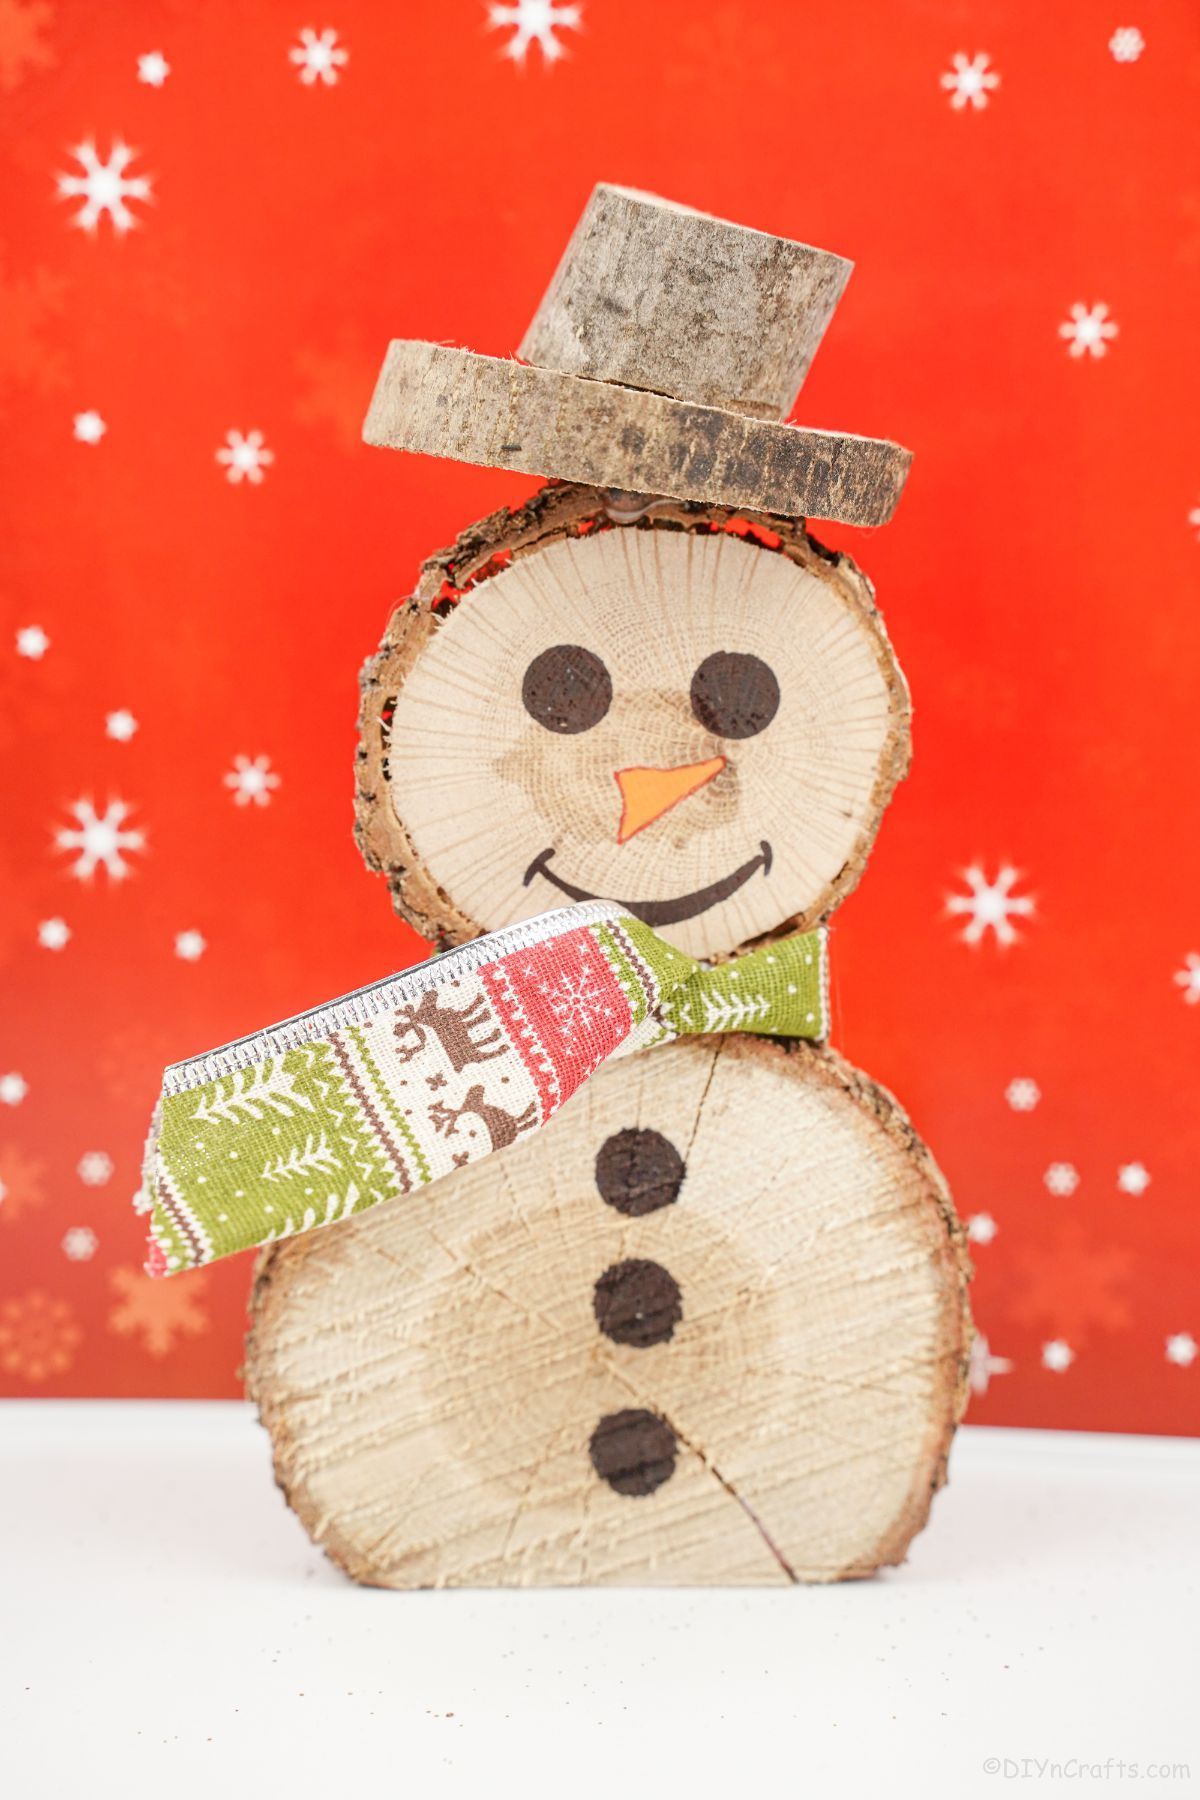 wooden slice snowman on white table with red background